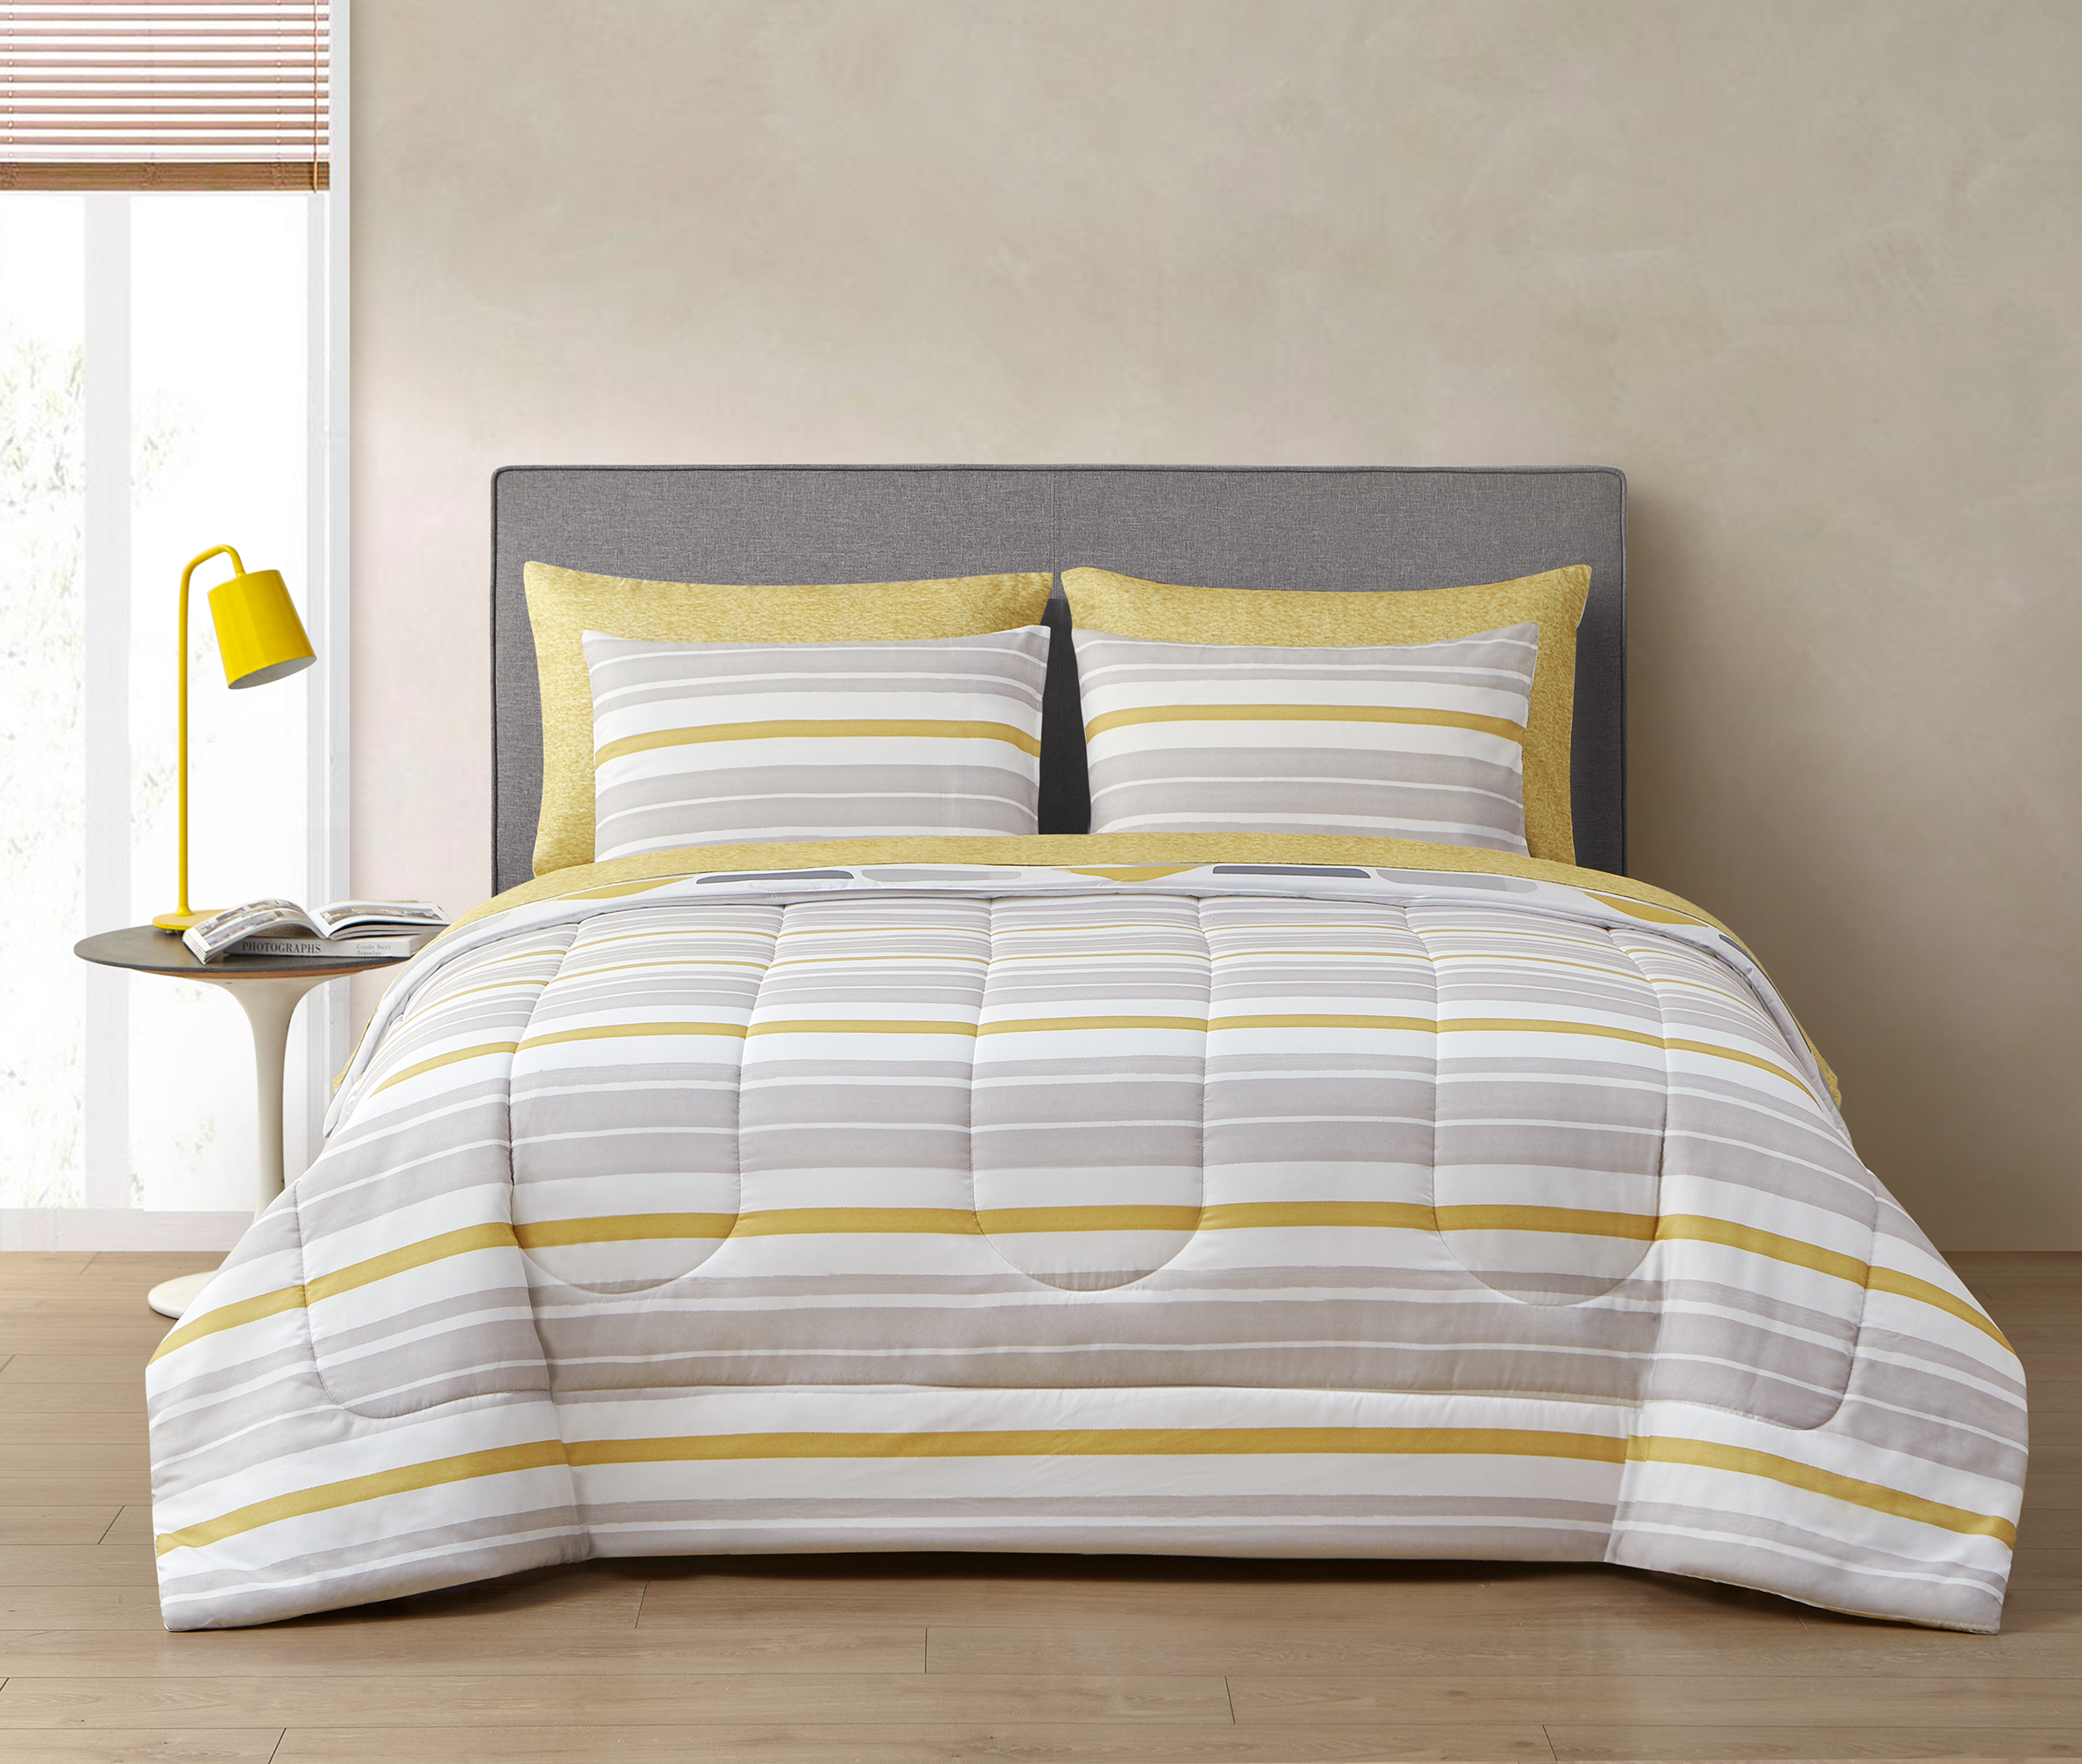 Style2 Kaiser Gray and Yellow 7-Piece Mix & Match Reversible Bed in a Bag, Queen - image 5 of 15